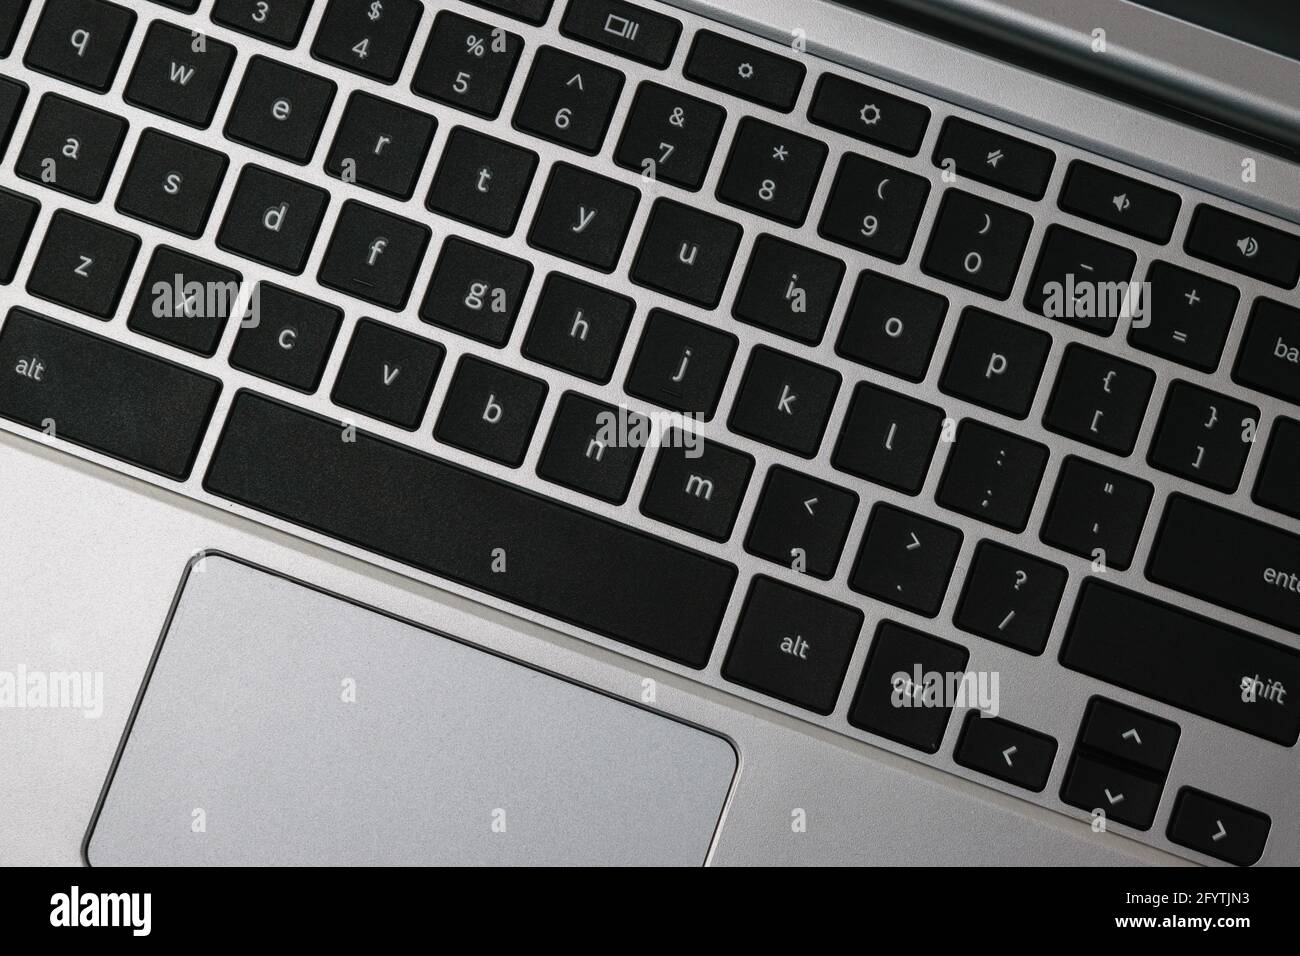 Top view of a silver and black notebook keyboard in close-up Stock Photo